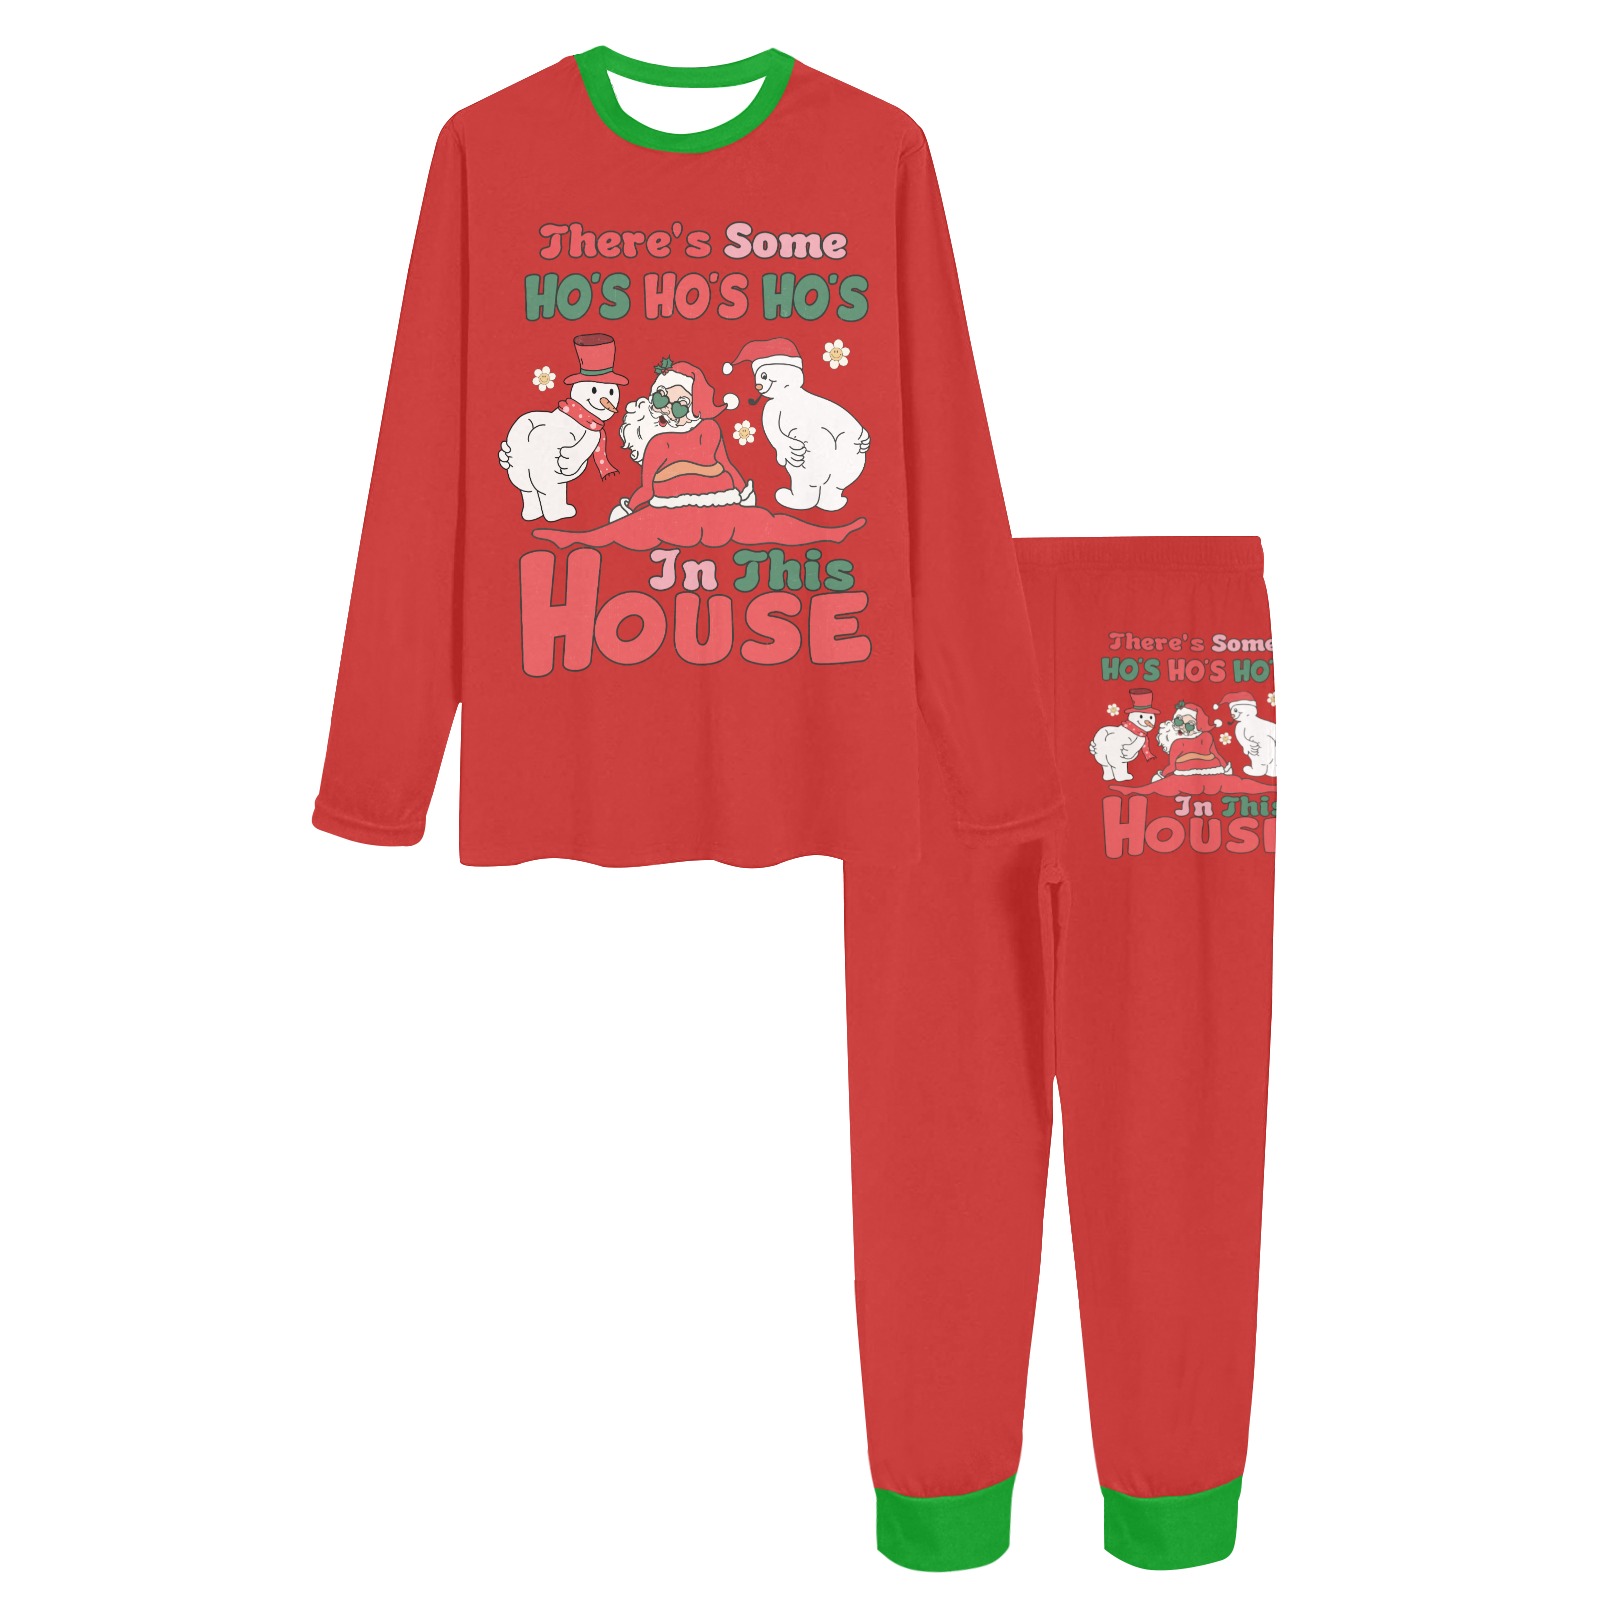 There's Some Ho's In This House (R) Women's All Over Print Pajama Set